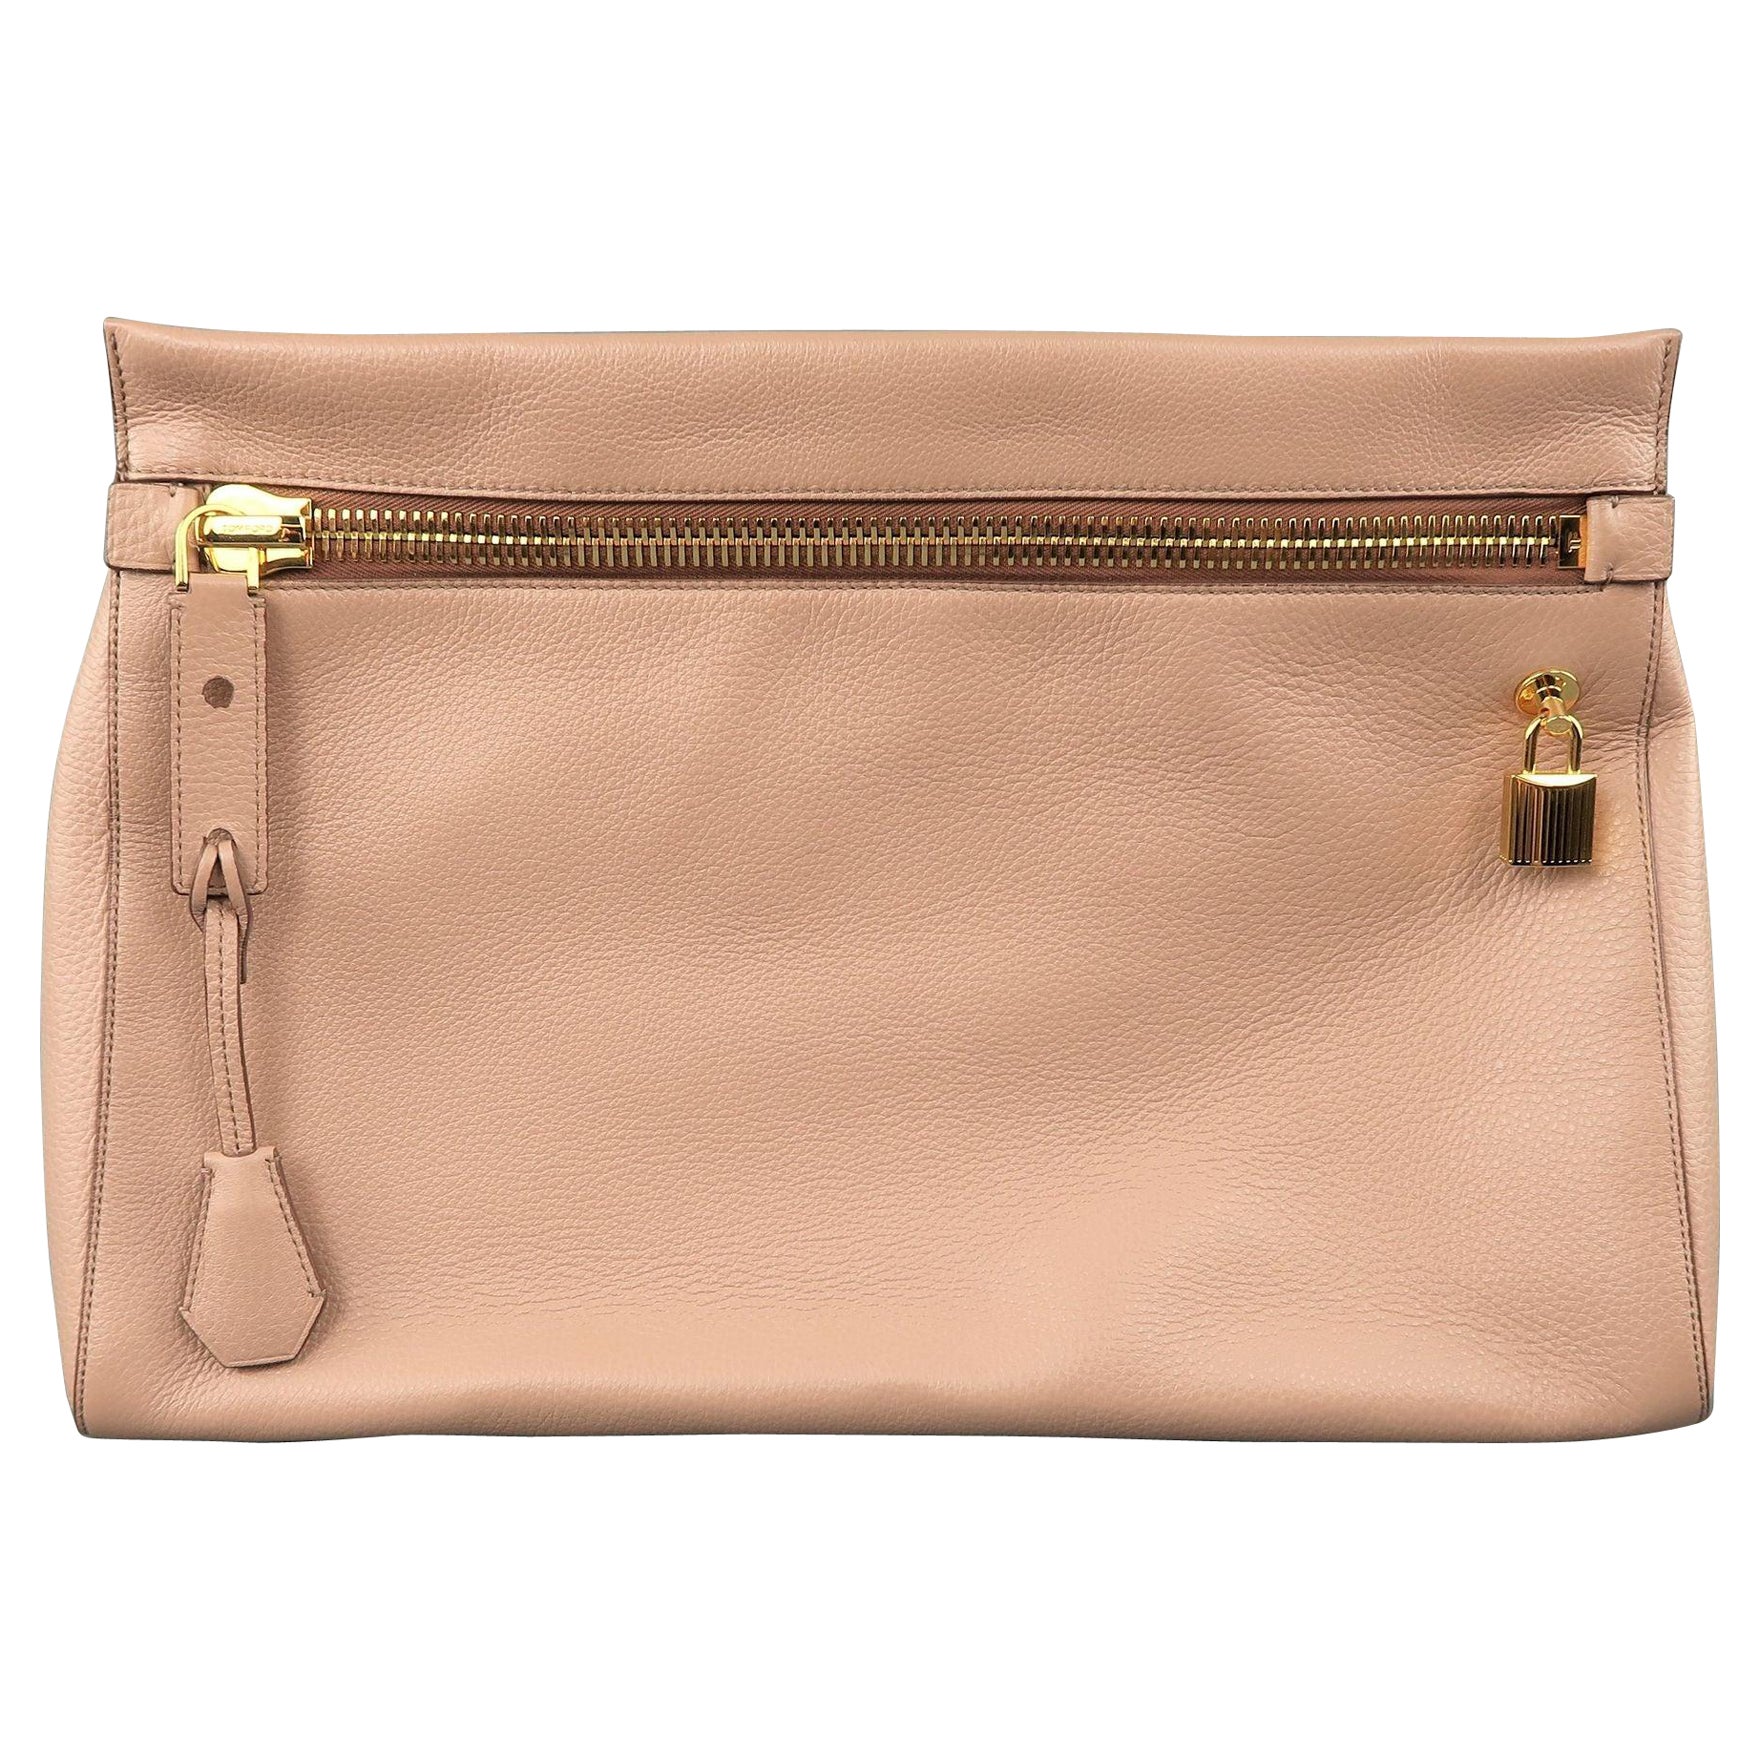 TOM FORD Nude Textured Leather Gold Padlock ALIX Clutch Handbag For Sale